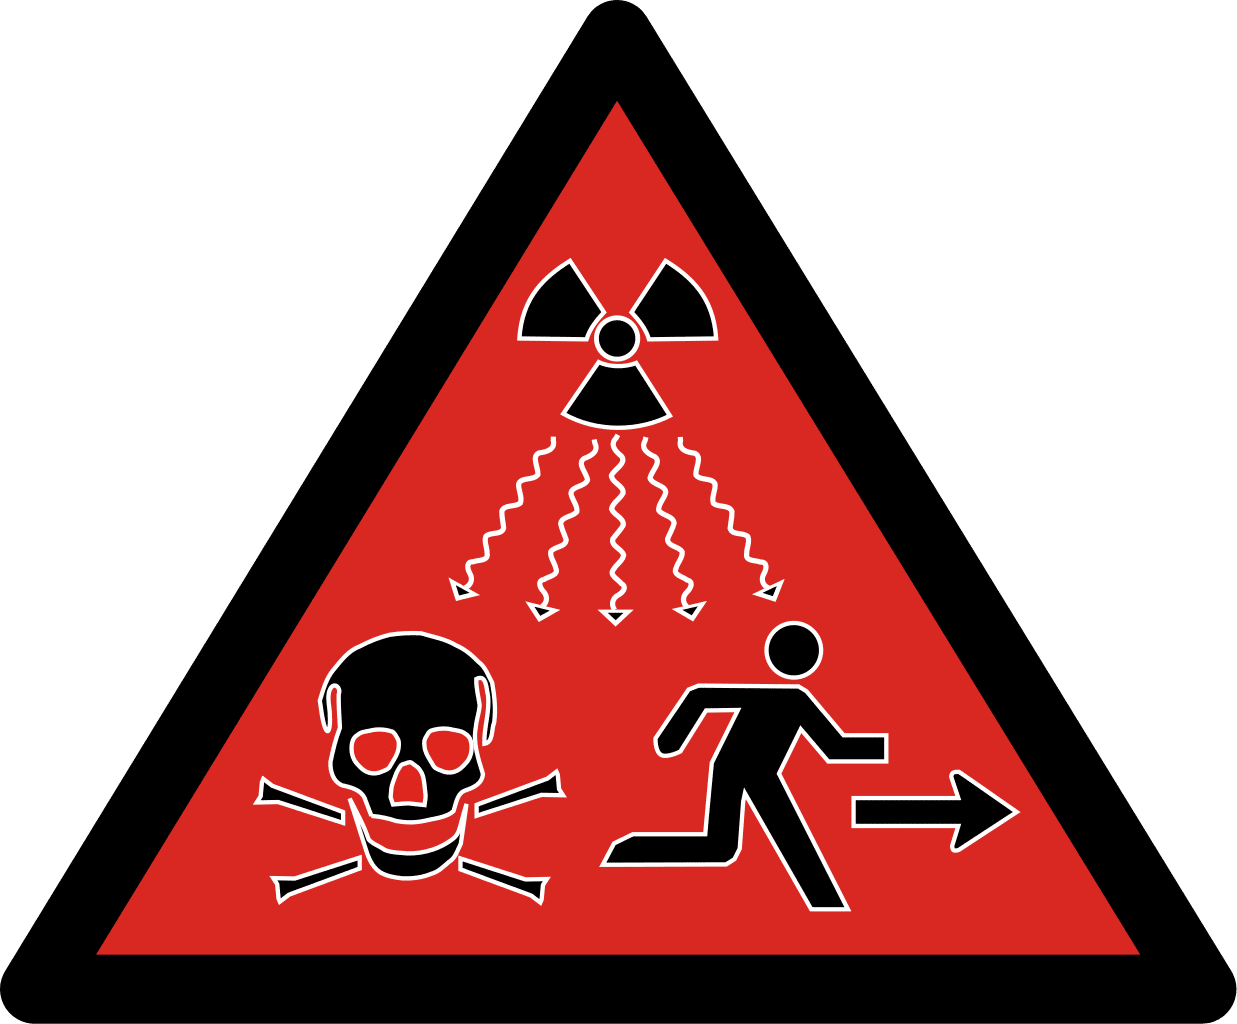 https://thebulletin.org/wp-content/uploads/2020/08/1237px-Logo_iso_radiation.svg-150x150.png